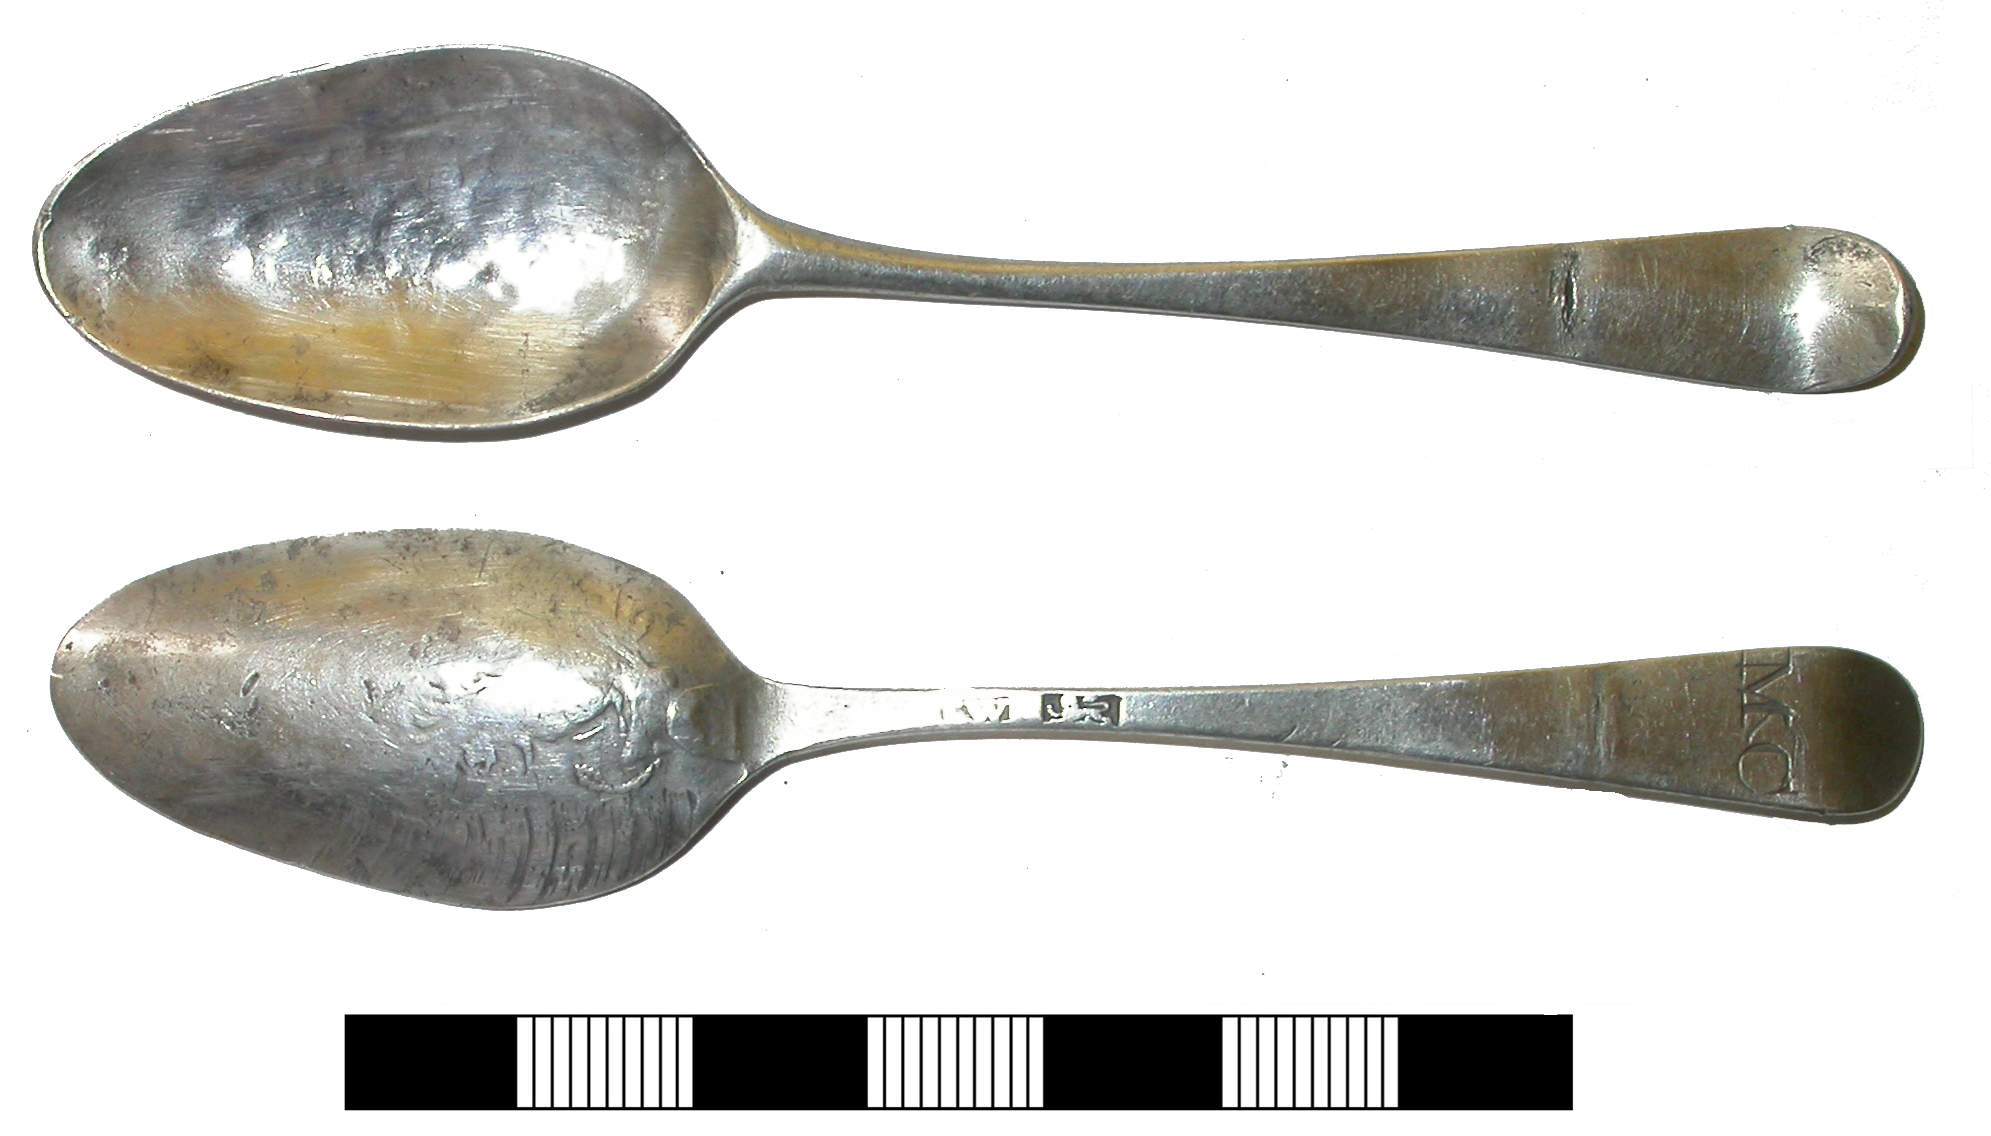 Discovering the Hidden Wisdom of the Silver Spoon